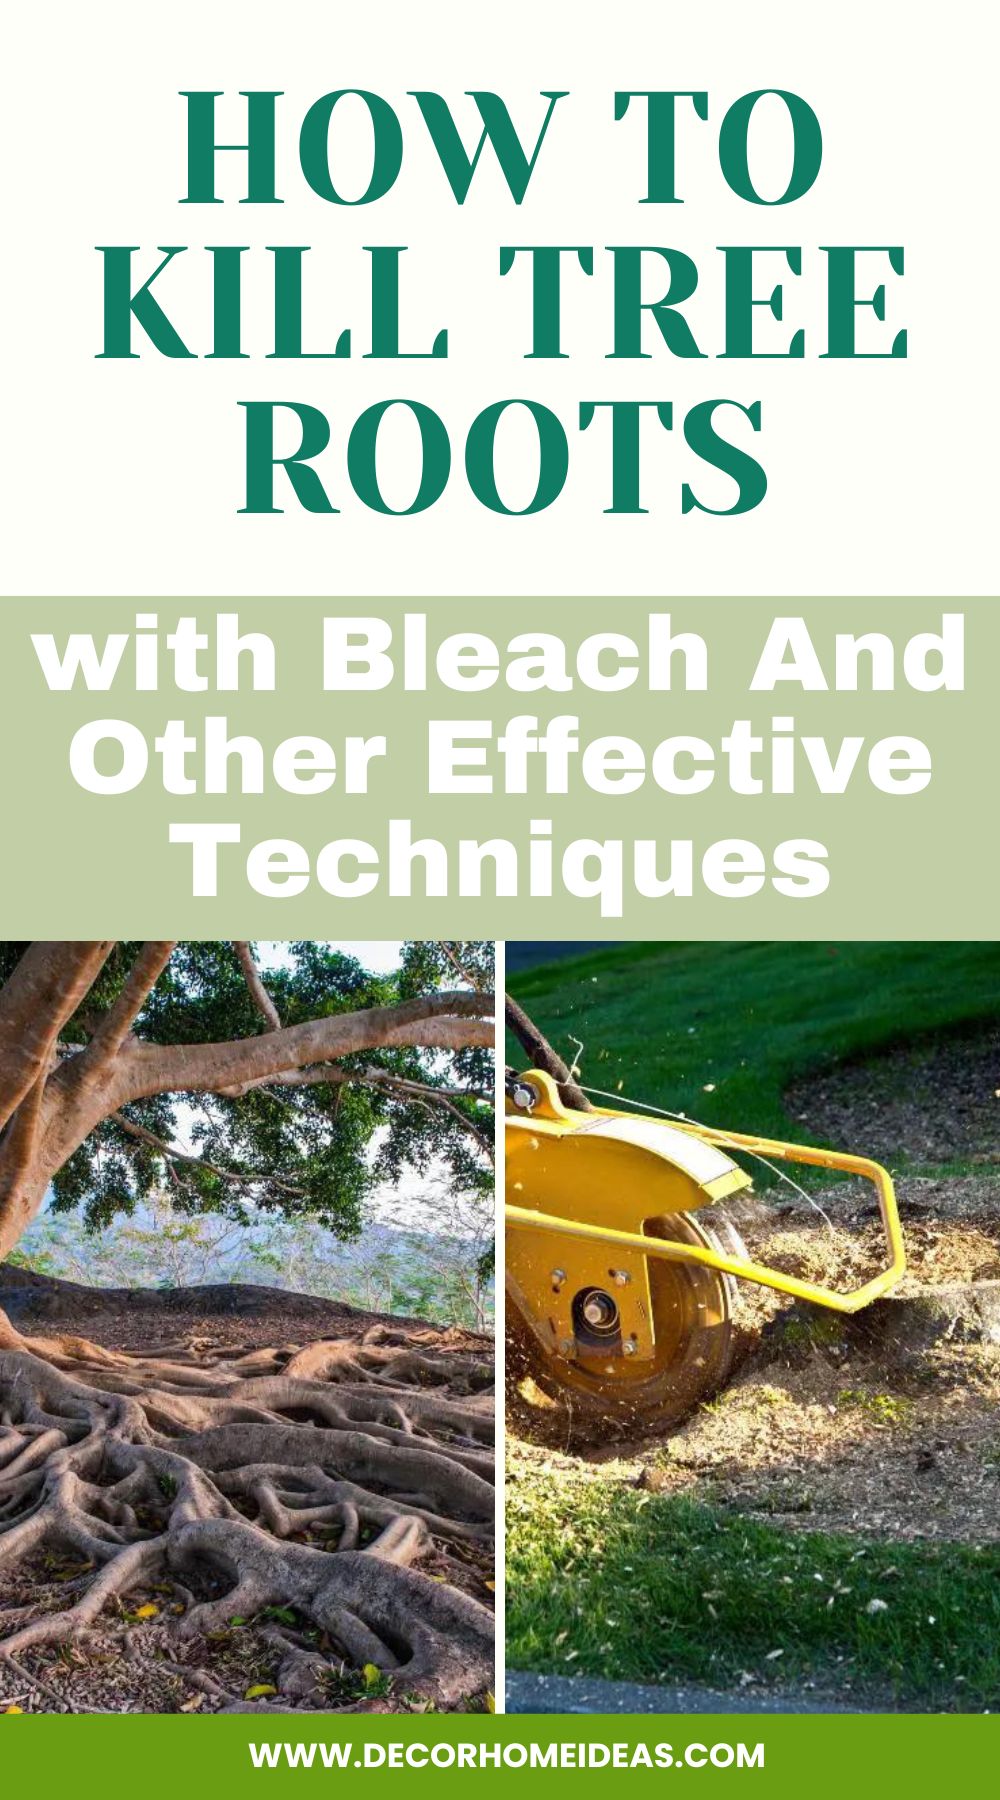 Discover effective techniques, including using bleach, to kill tree roots and regain control over your garden or yard. Learn step-by-step methods and alternative approaches to effectively remove tree roots and prevent further damage to your property.